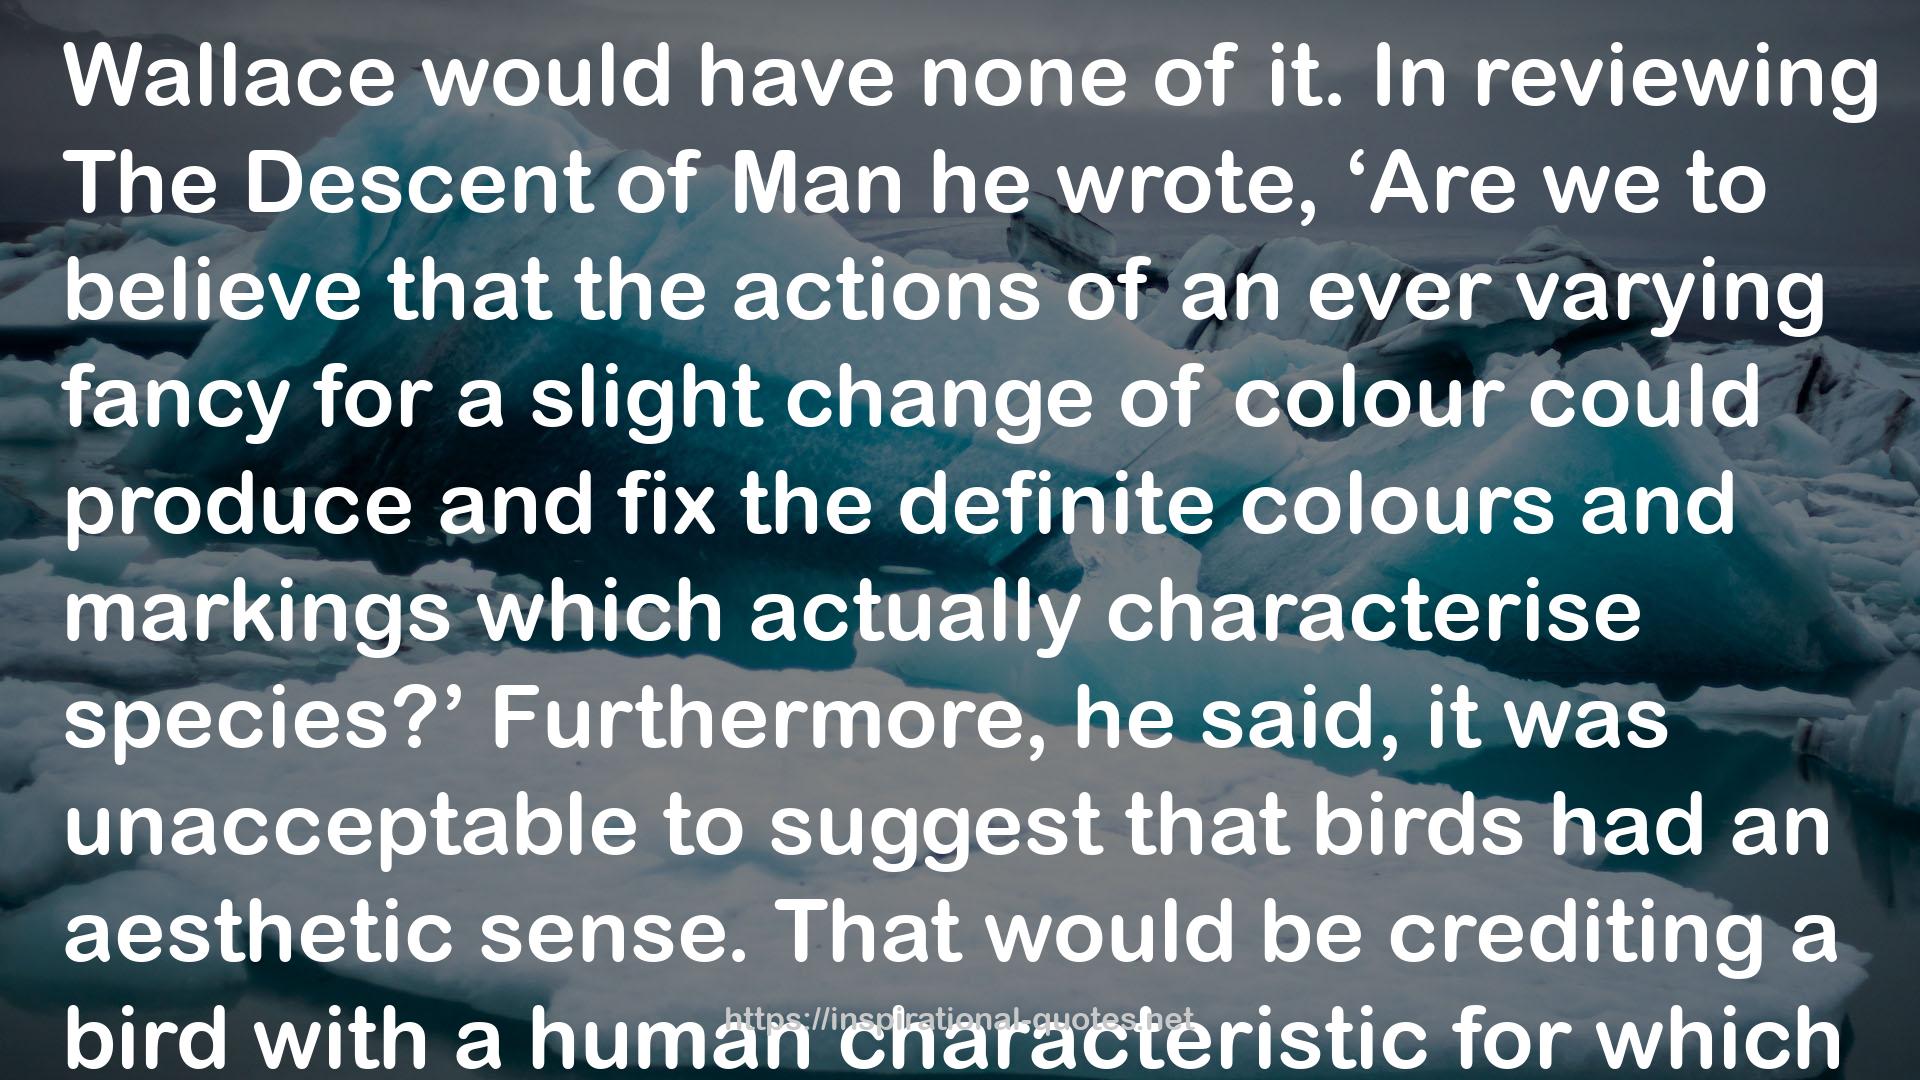 David Attenborough's Why Do Birds of Paradise Dance (Collins Shorts, Book 7) QUOTES